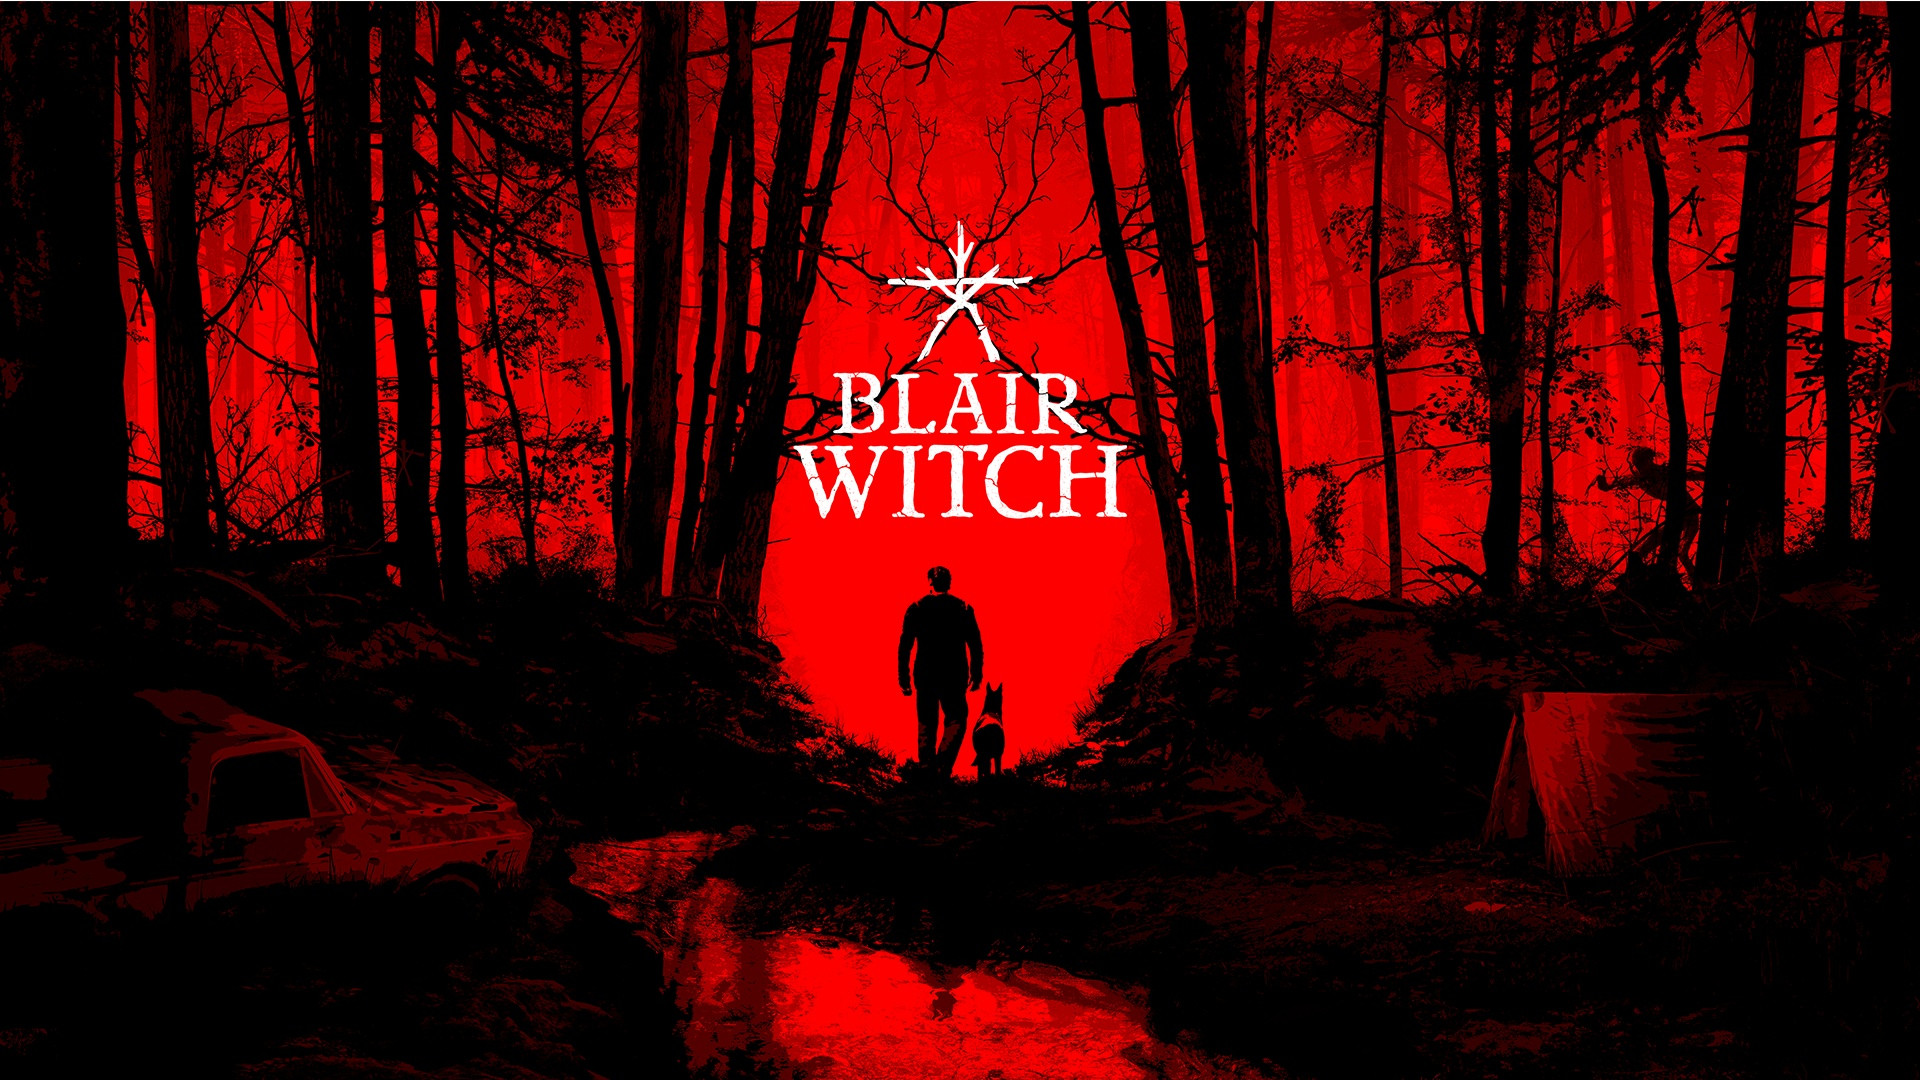 Blair Witch: How You Play Matters